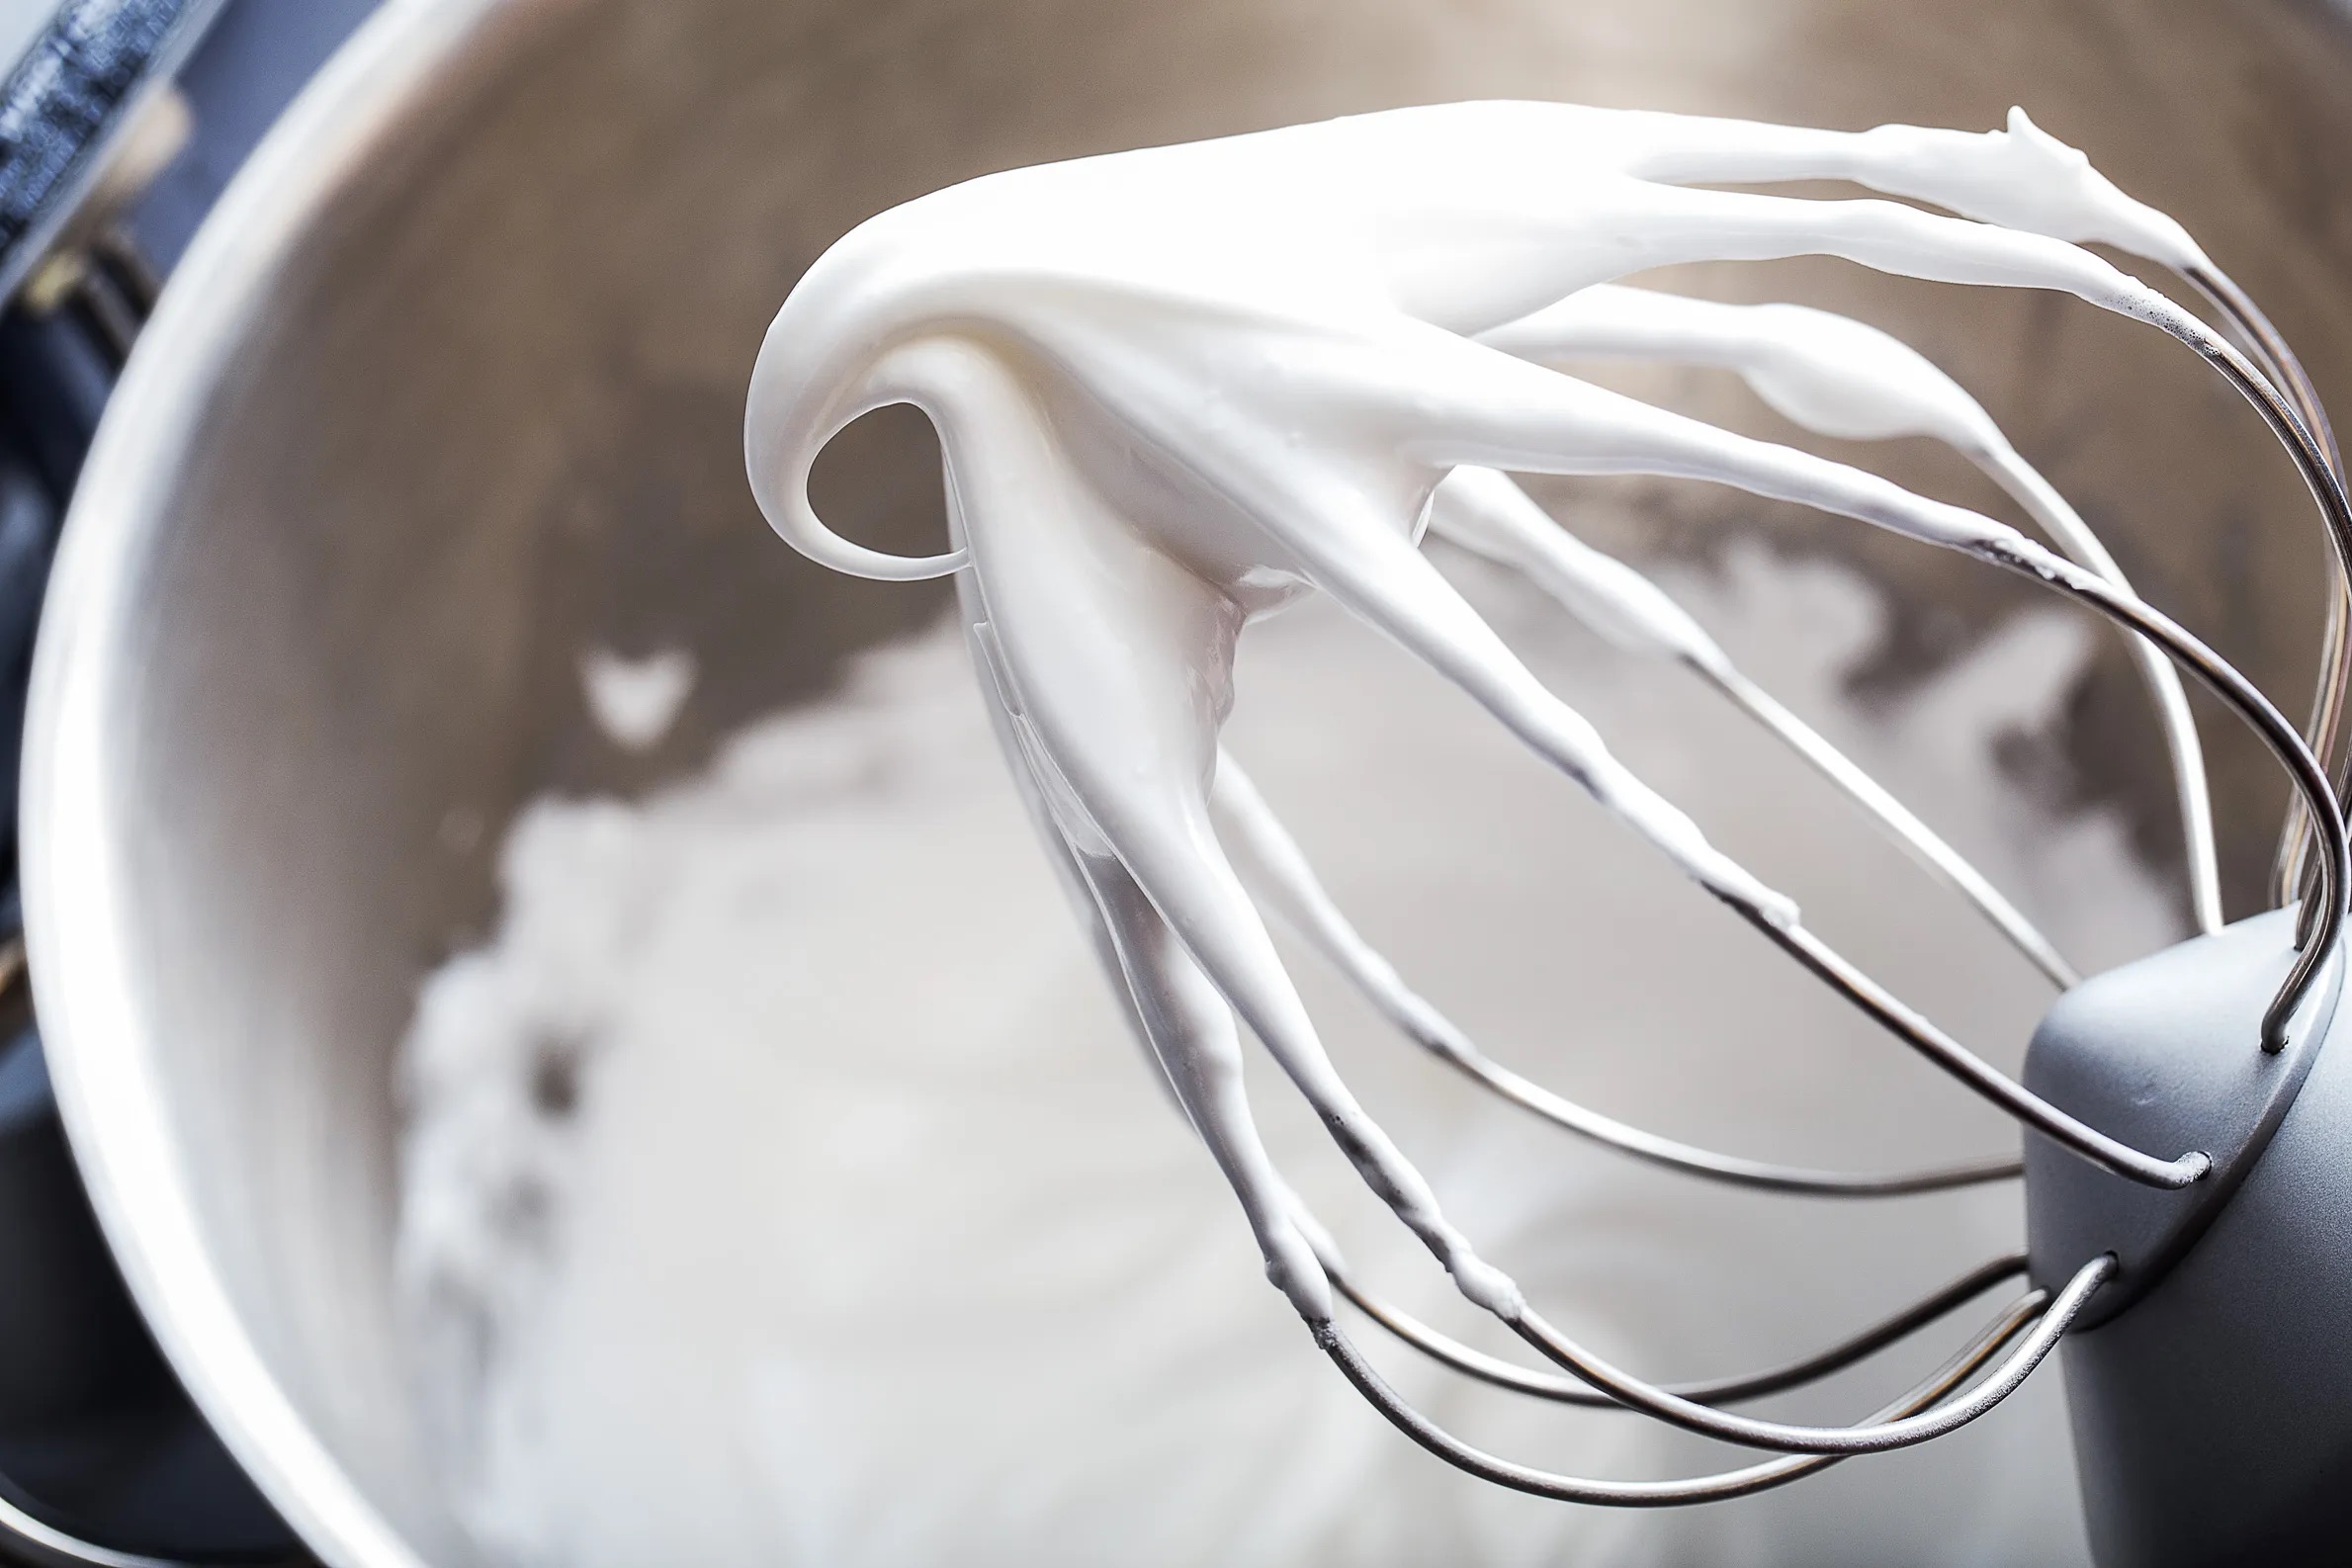 How Long Does It Take To Make Meringue With A Hand Mixer